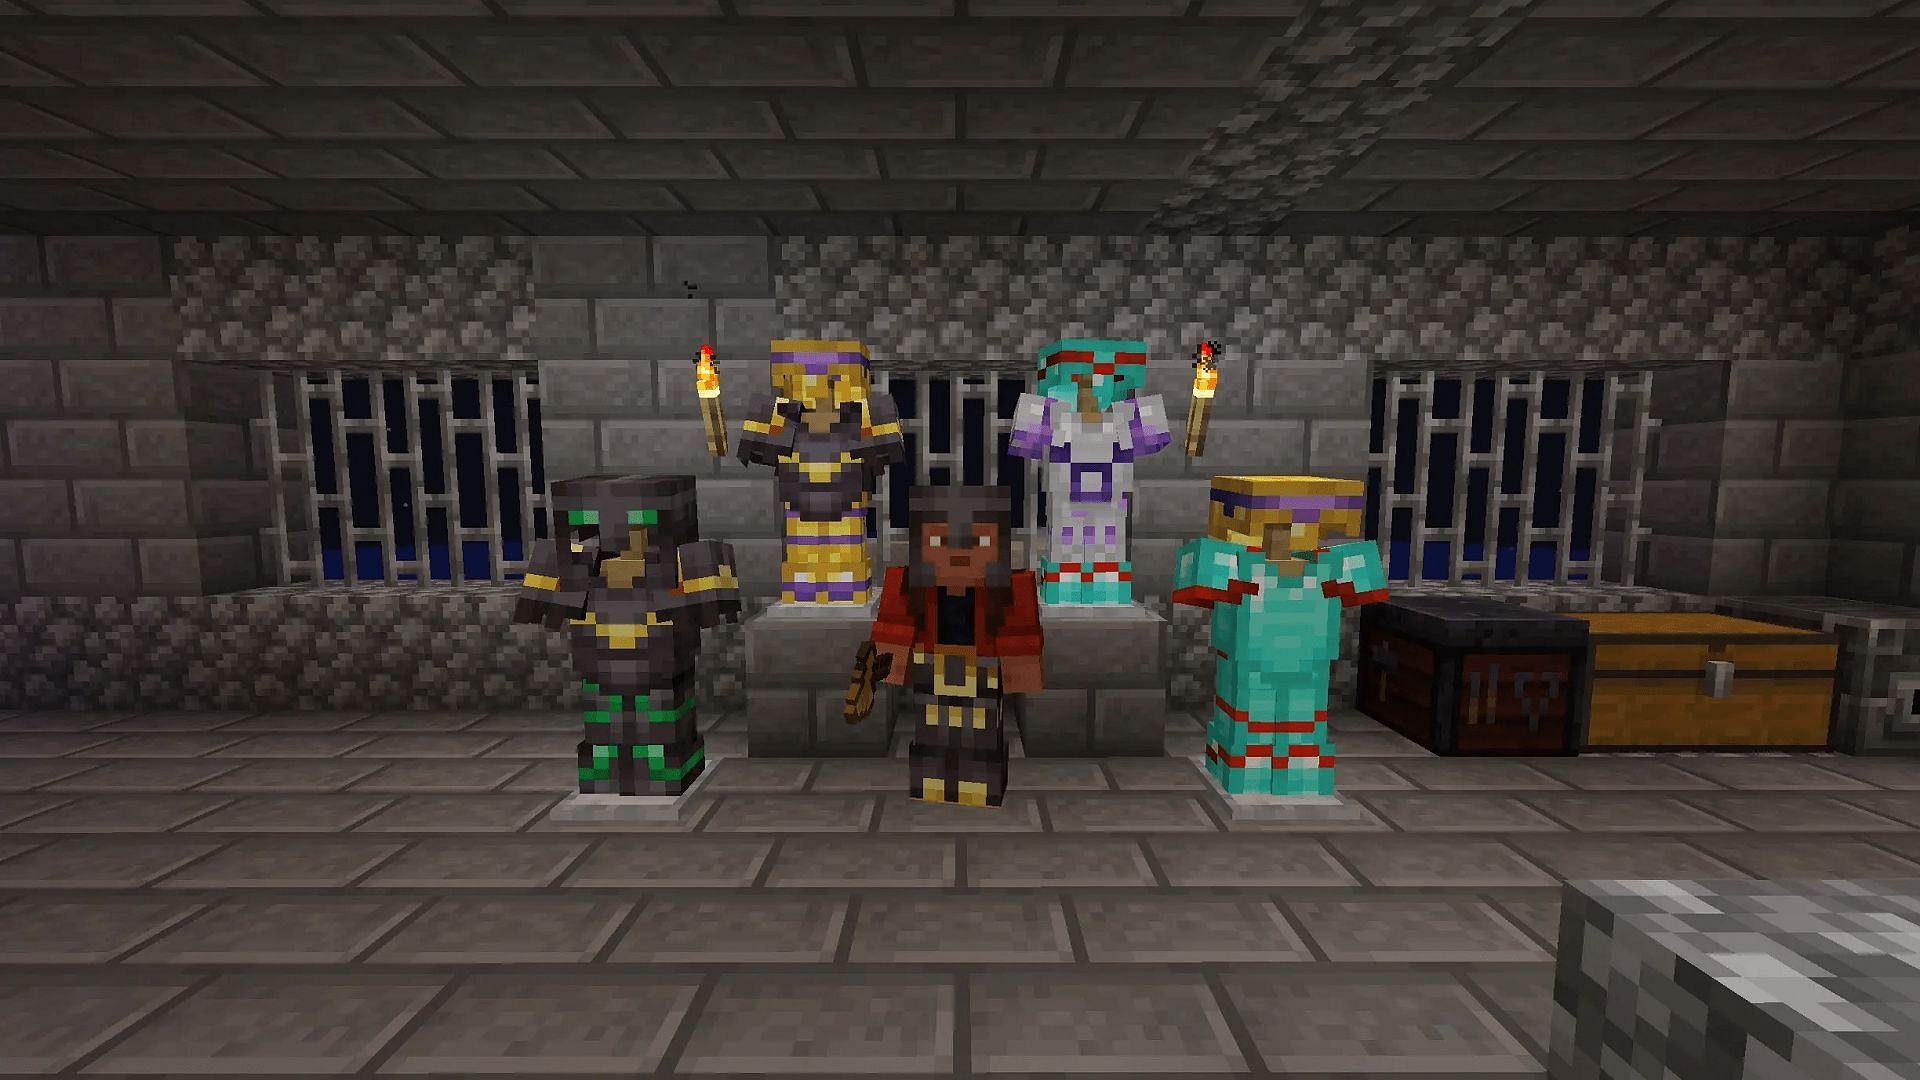 Armor trimming is an all-new way to customize gear in Minecraft 1.20 (Image via Mojang)